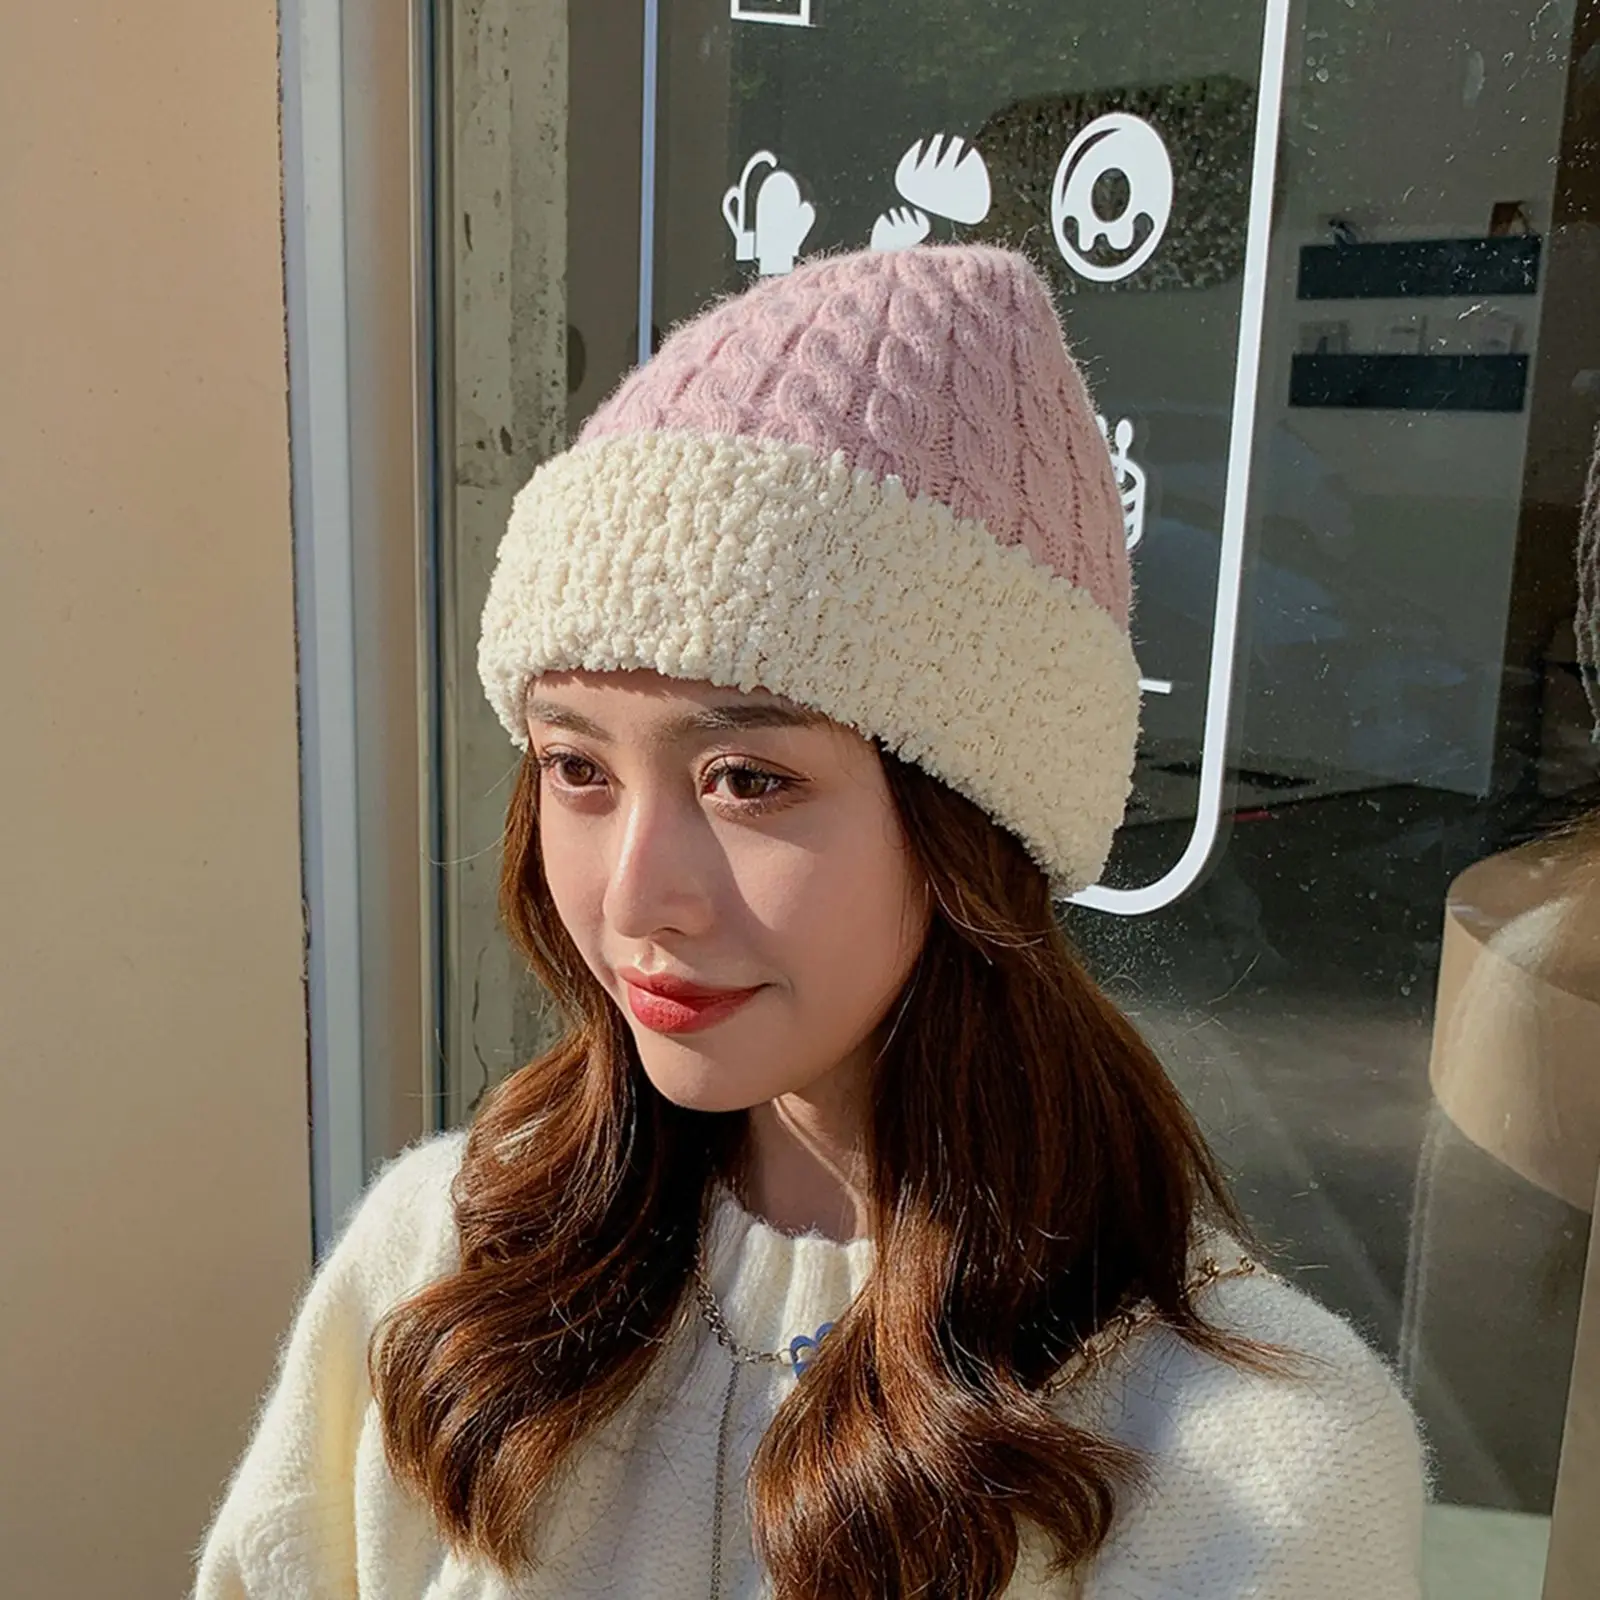 Women Thick Elastic Beanie, Autumn Winter Keep Warmth Knitted Headgear, Thermal Stylish Leisure Hats for Outdoor Decoration